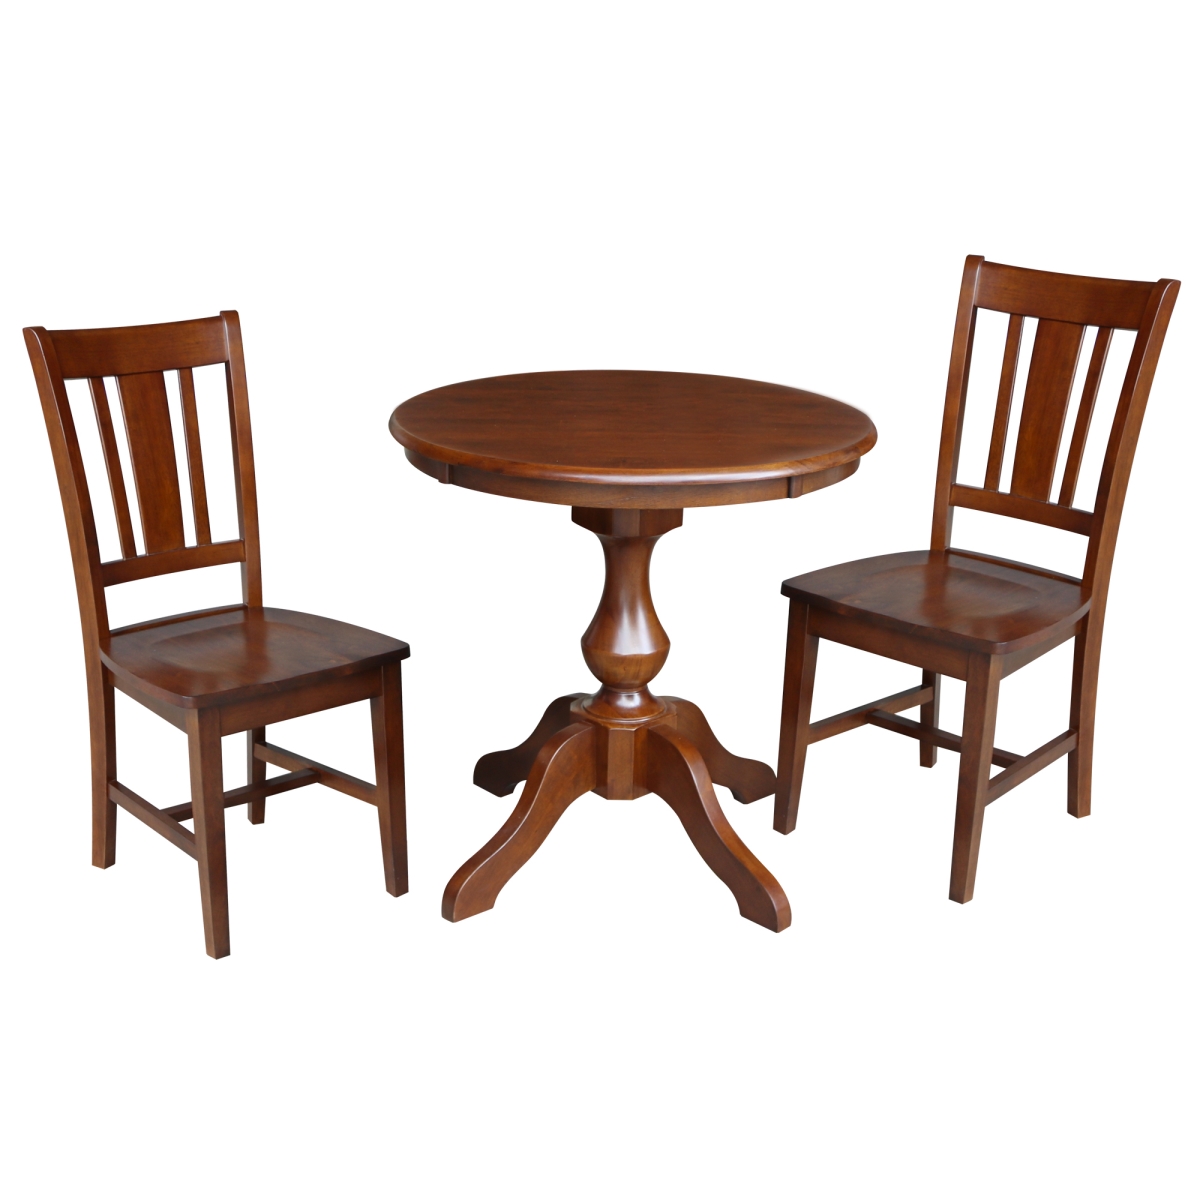 K581-30rt-11b-c10-2 30 In. Round Top Pedestal Table With 2 Chairs, Espresso - 3 Piece